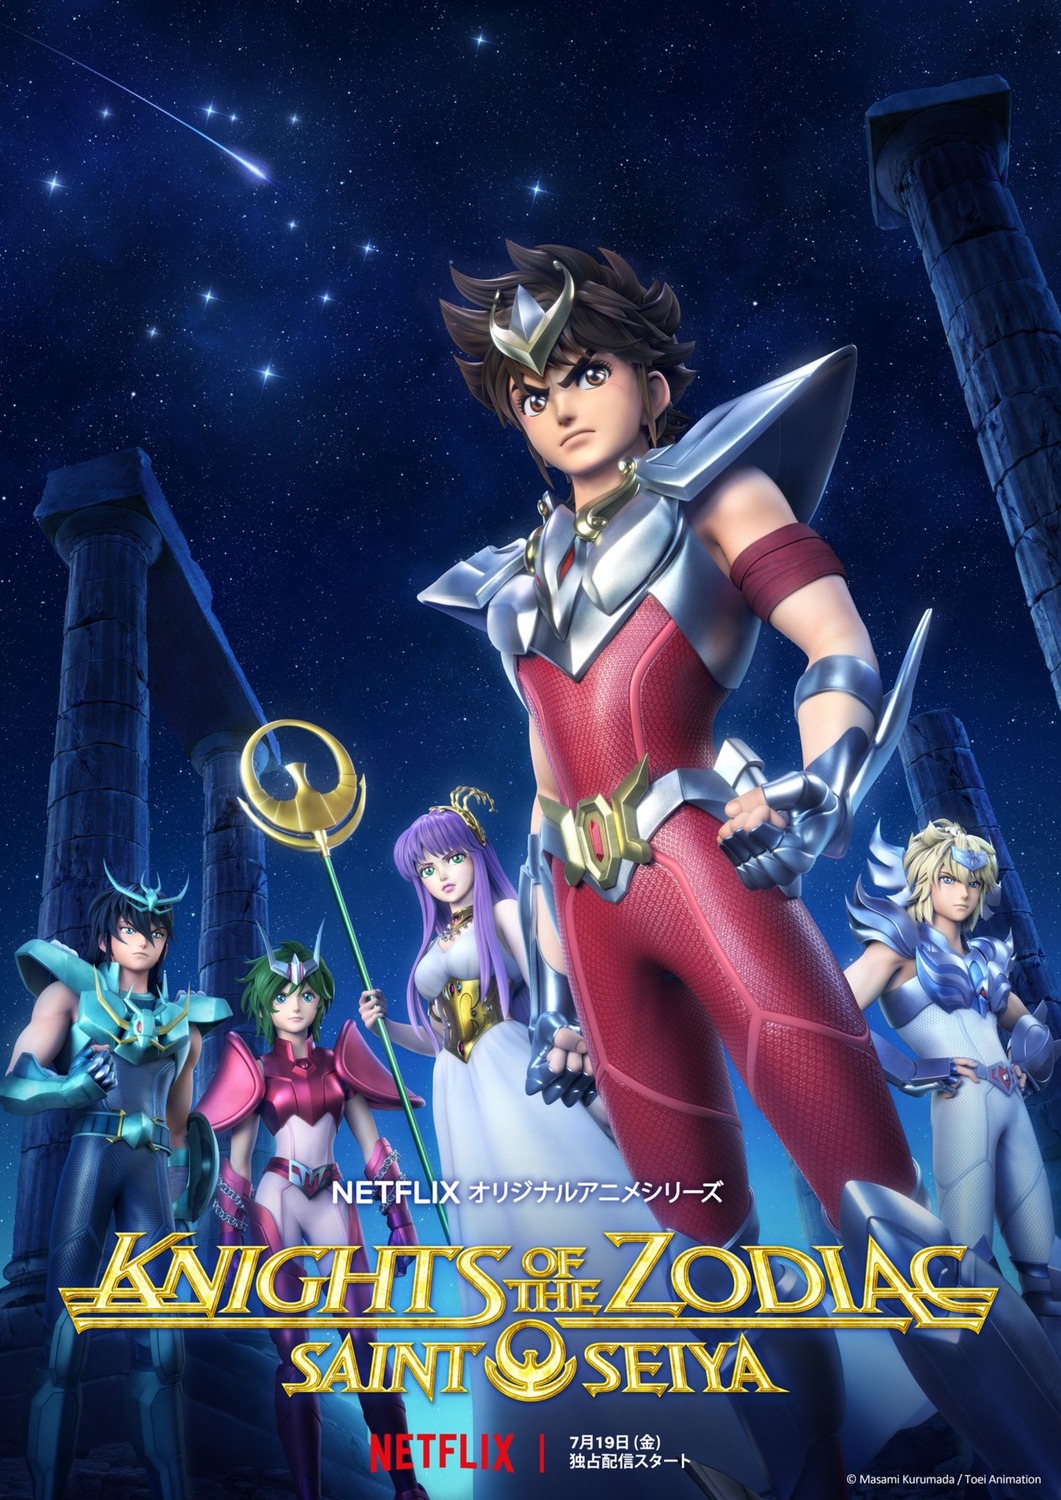 Extra Large TV Poster Image for Saint Seiya: Knights of the Zodiac (#2 of 2)